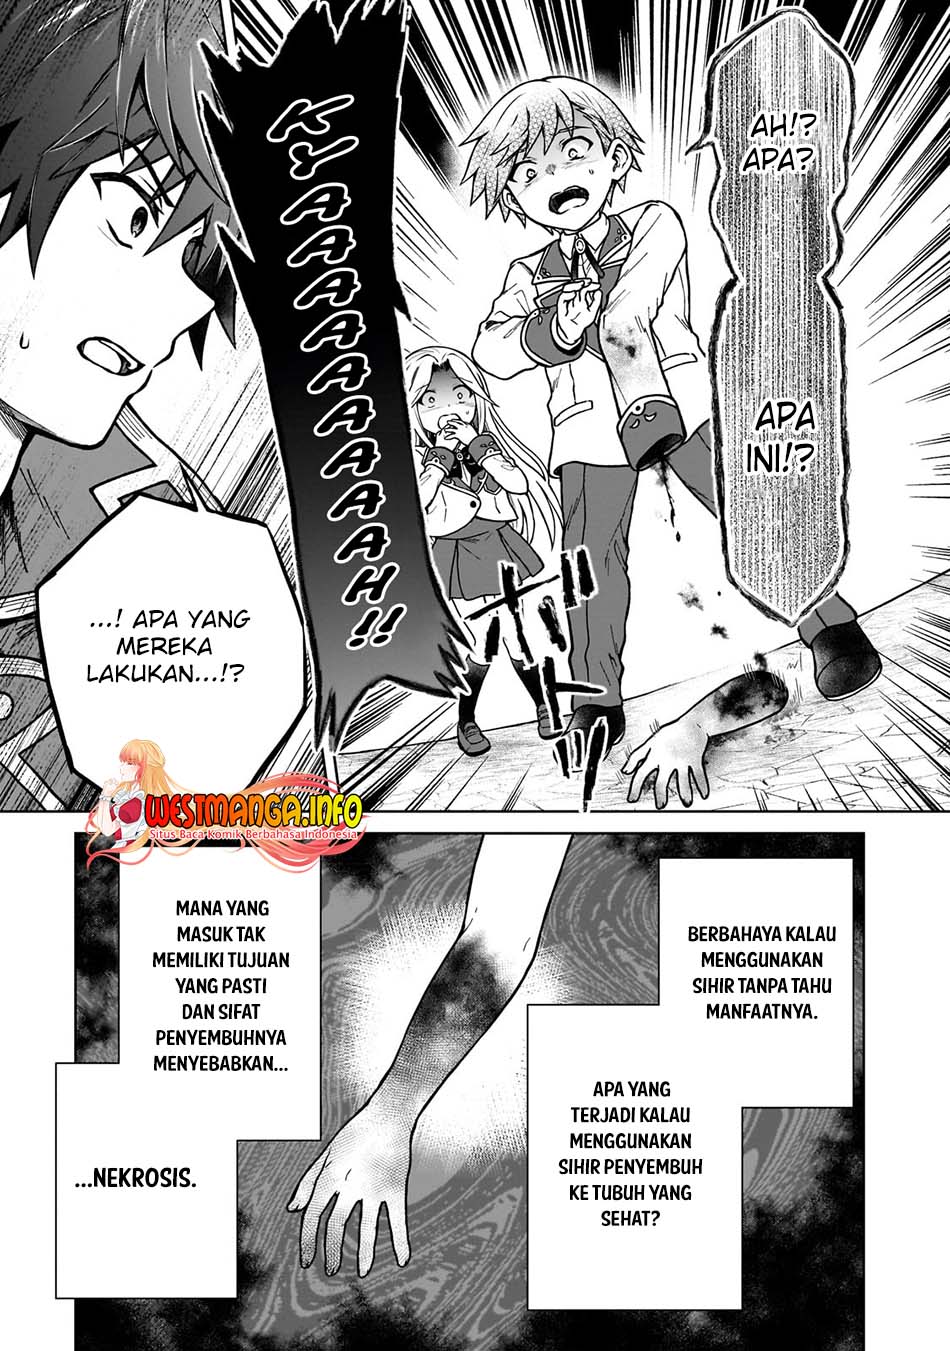 Dilarang COPAS - situs resmi www.mangacanblog.com - Komik d rank adventurer invited by a brave party and the stalking princess 016 - chapter 16 17 Indonesia d rank adventurer invited by a brave party and the stalking princess 016 - chapter 16 Terbaru 11|Baca Manga Komik Indonesia|Mangacan